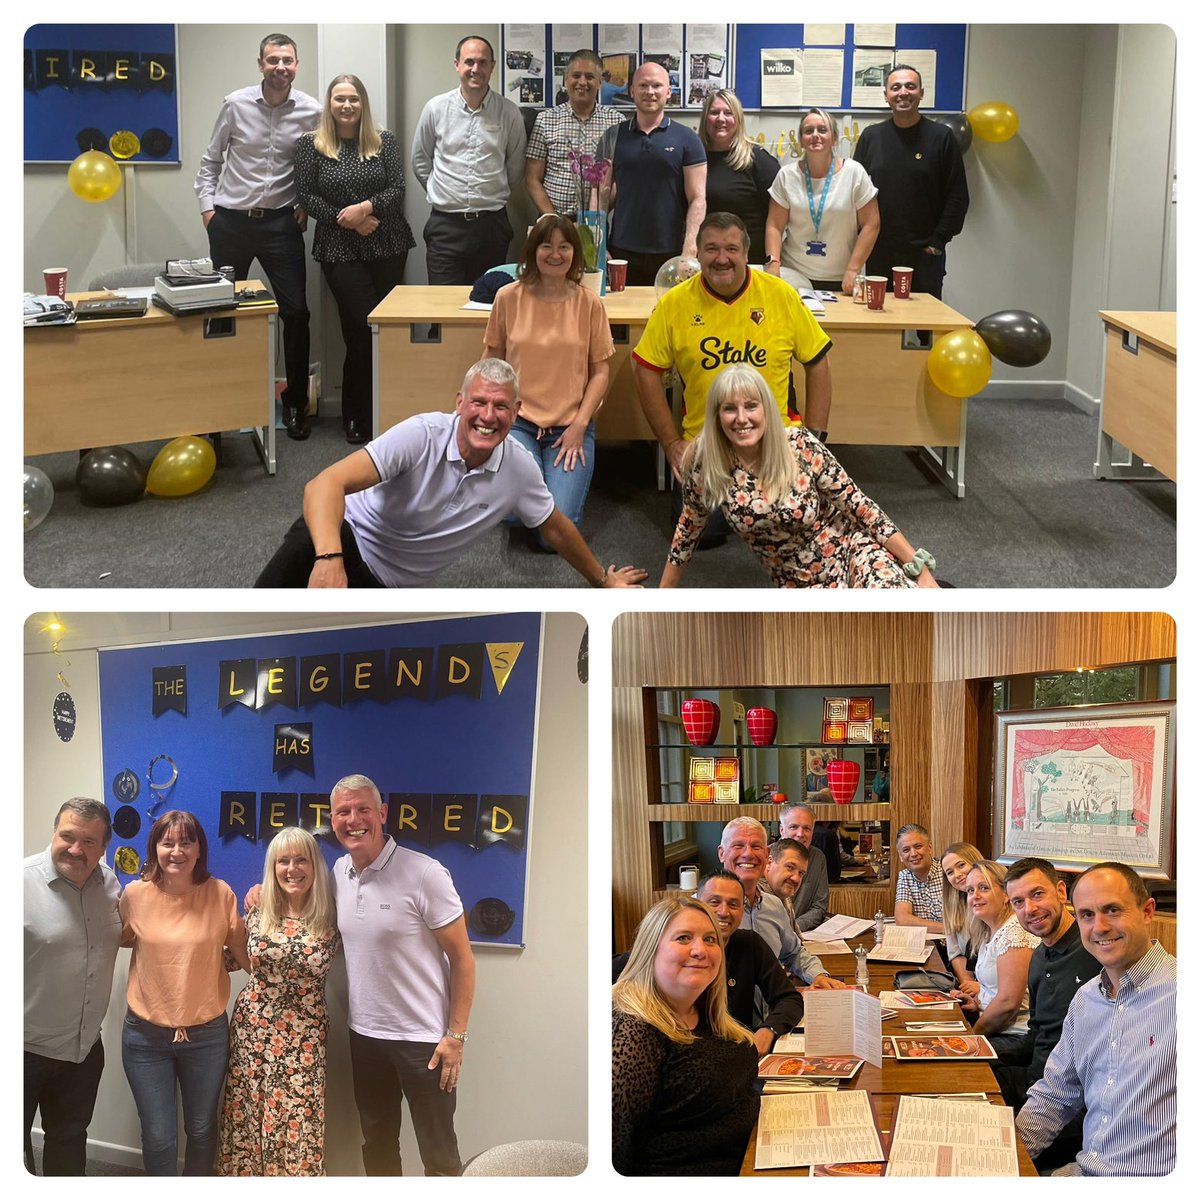 A day of mixed emotions yesterday, 4 legends are leaving the Co-op! @MarkWal80246378 @jenny_barnes1 @Vicky66405051 @PaulSlade19 have been the most incredible colleagues to work with and learn from, and wishing them all the best for their futures! You will all be truly missed 💙